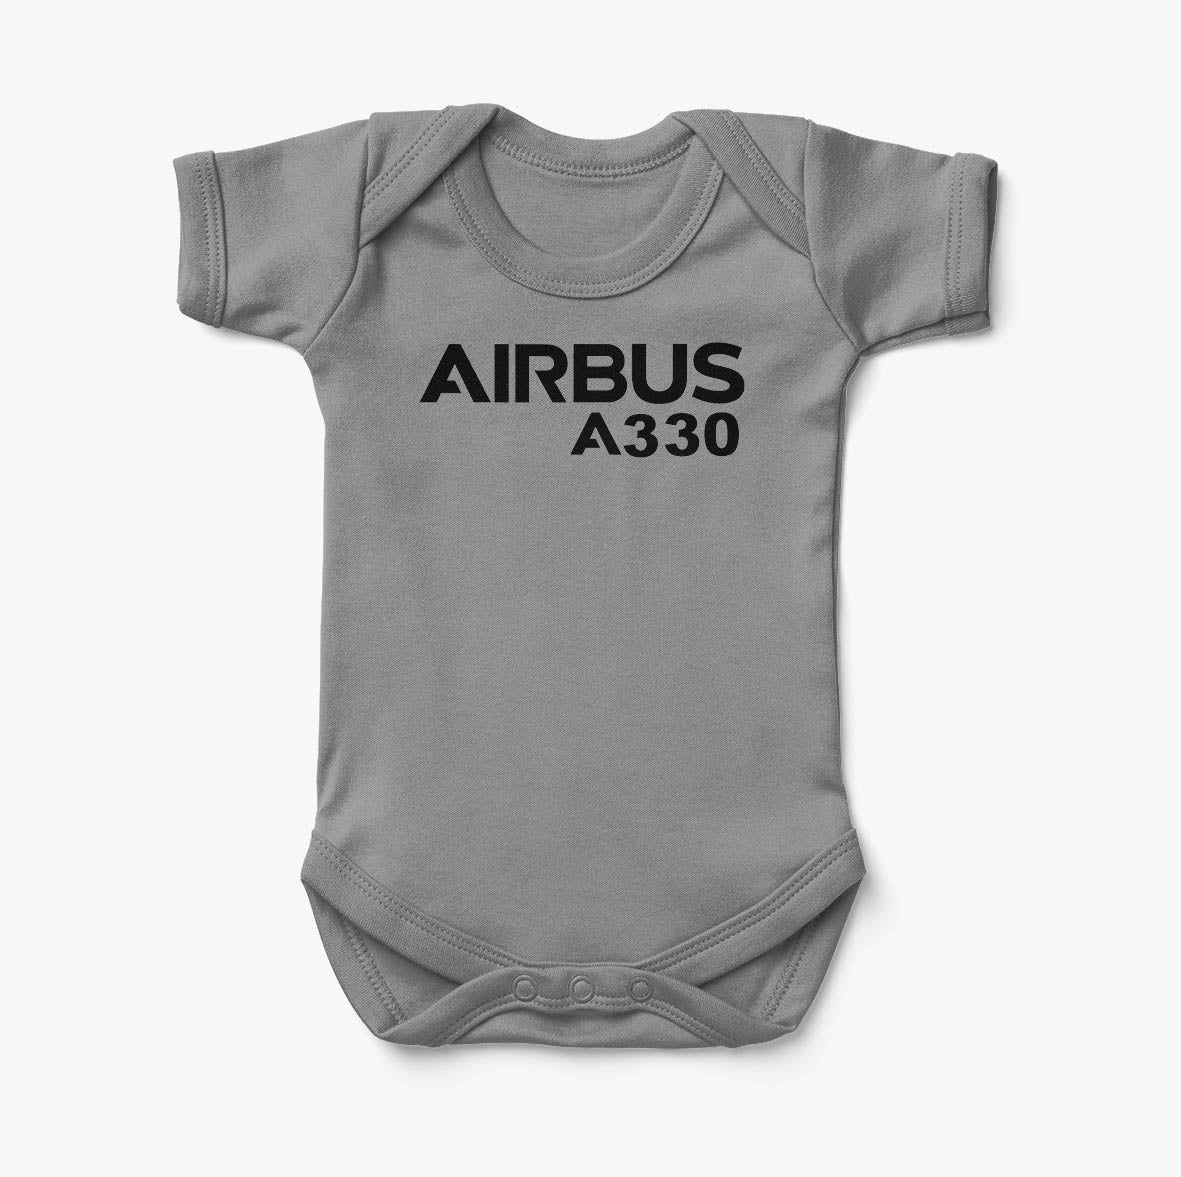 Airbus A330 & Text Designed Baby Bodysuits